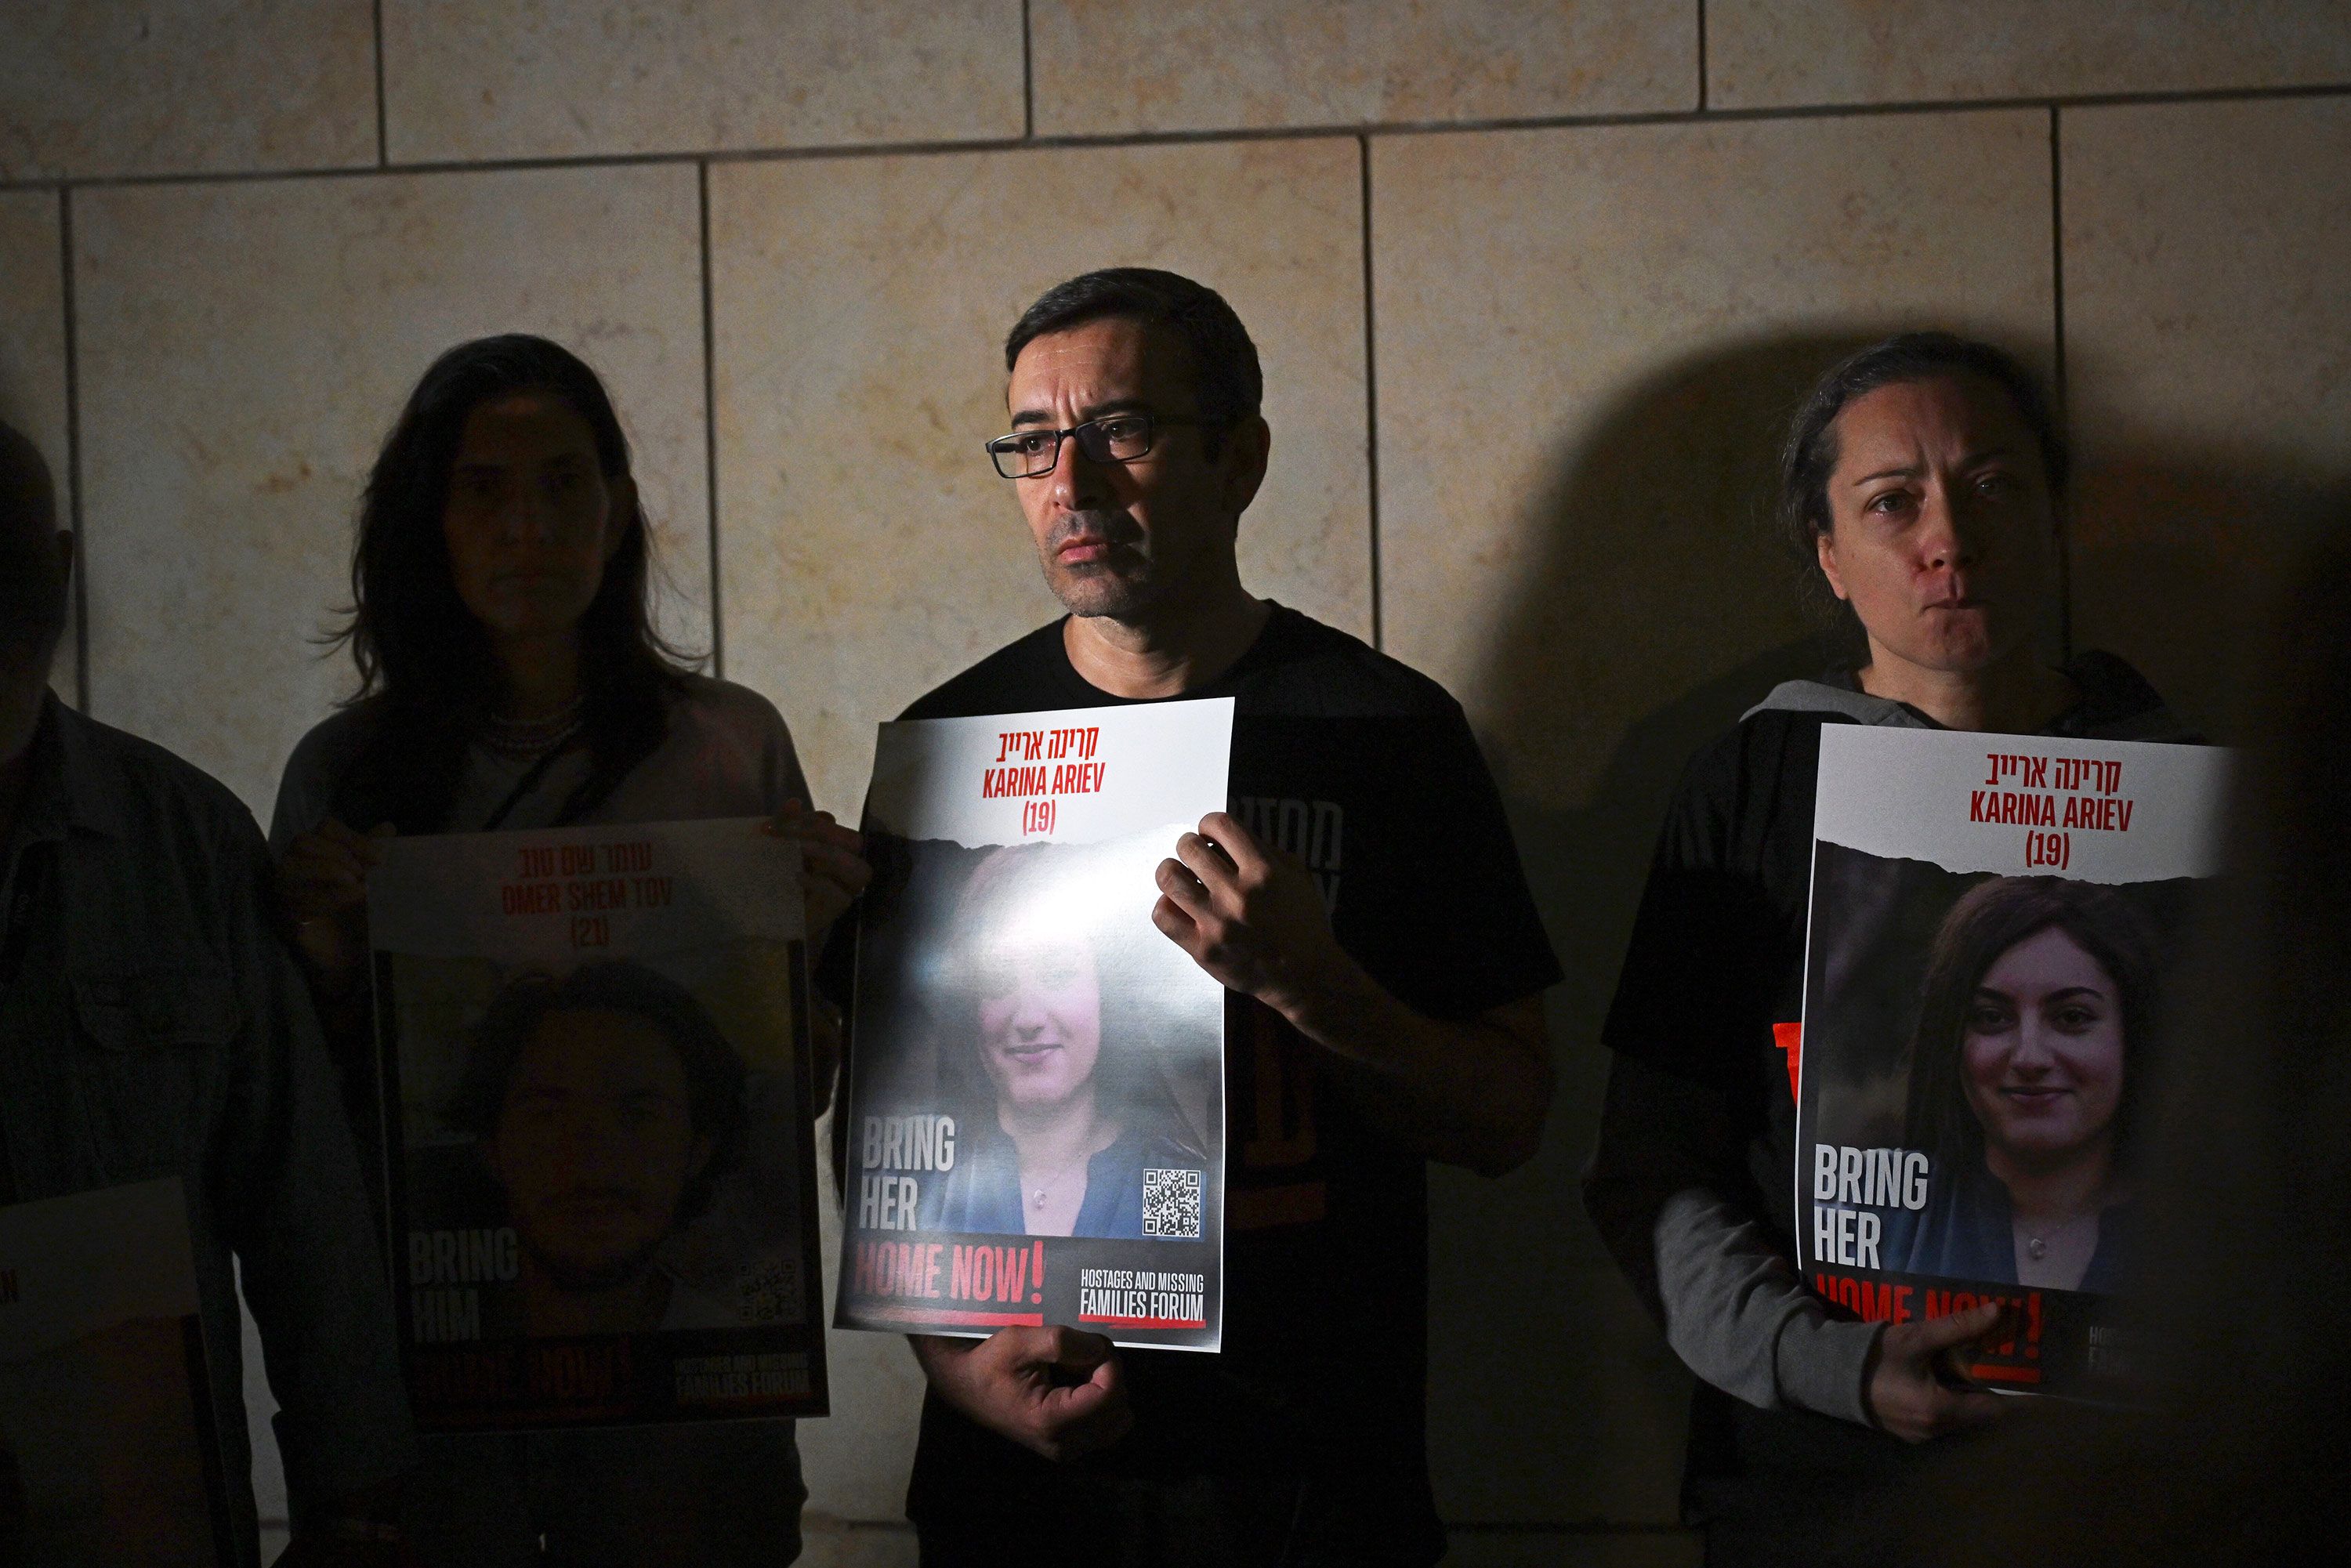 Relatives of hostages speak to the media during the 'Lighting up the Light' campaign for the return of those held captive, in Tel Aviv, Israel, on October 21.